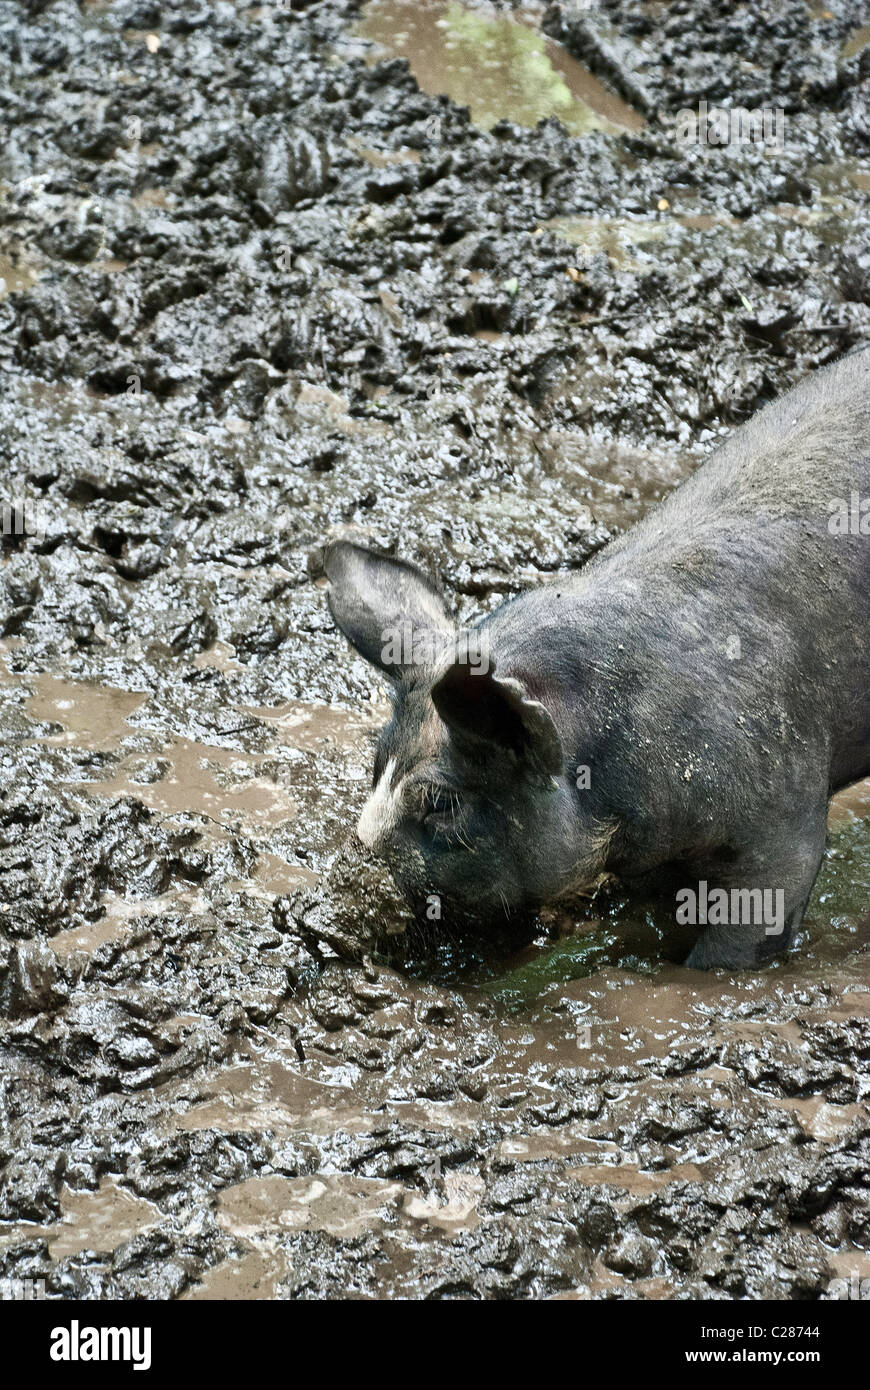 Berkshire Pig rooting in a mud wallow, Stone Barns Center for Food and Agriculture, Pocantico Hills, New York, USA Stock Photo